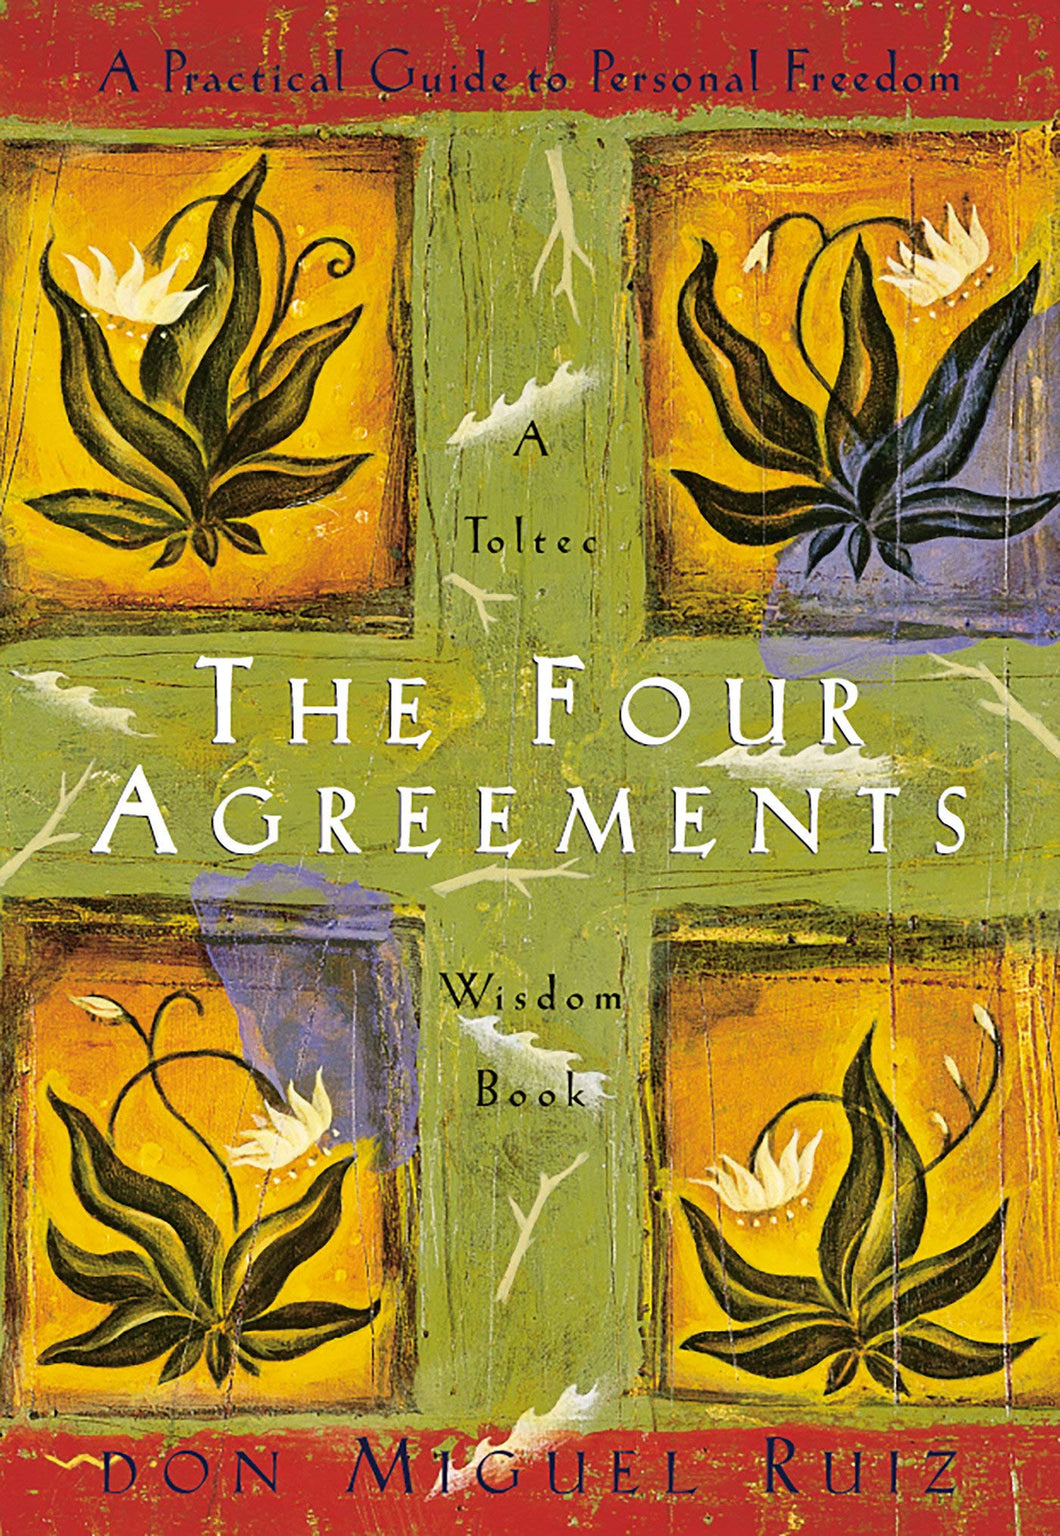 The Four Agreements: A Practical Guide to Personal Freedom (A Toltec Wisdom Book) by Don Miguel Ruiz